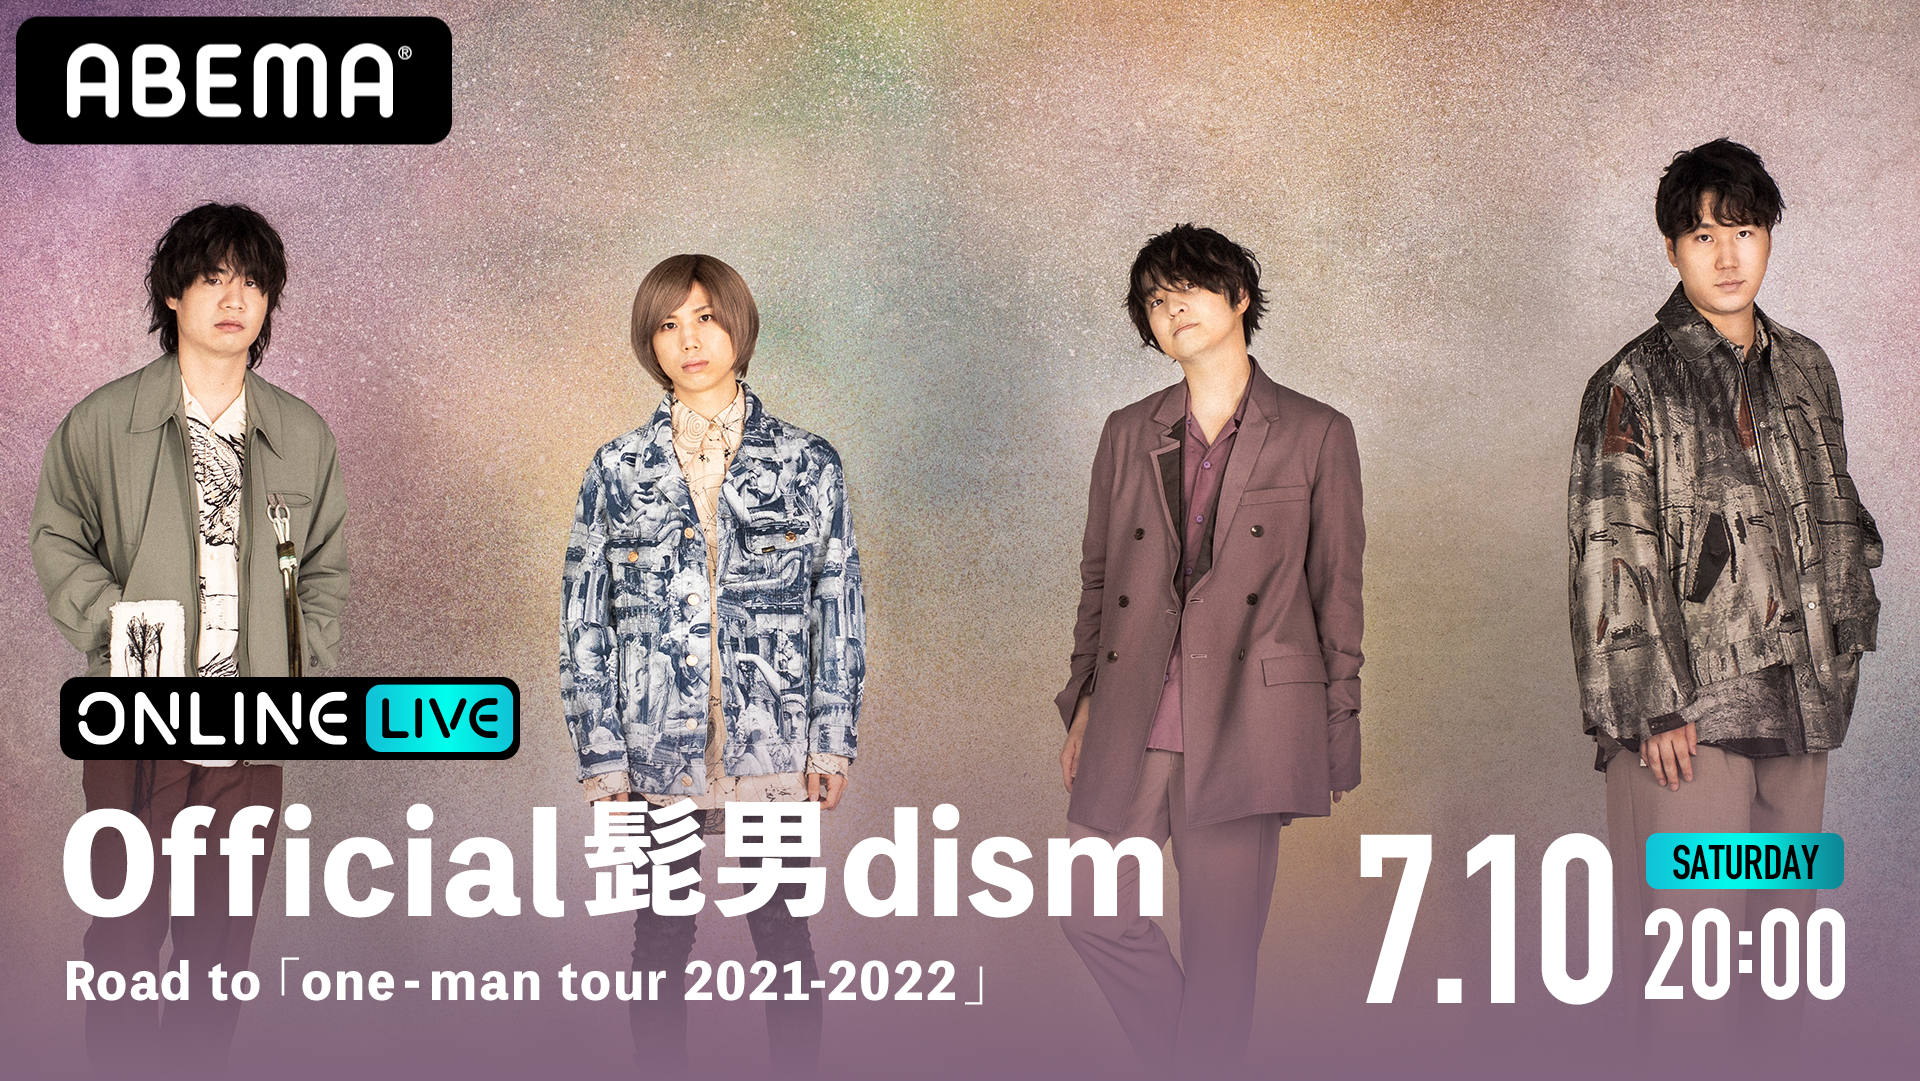 Official髭男dism Road to 「one - man tour 2021-2022 」 | ABEMA PPV 